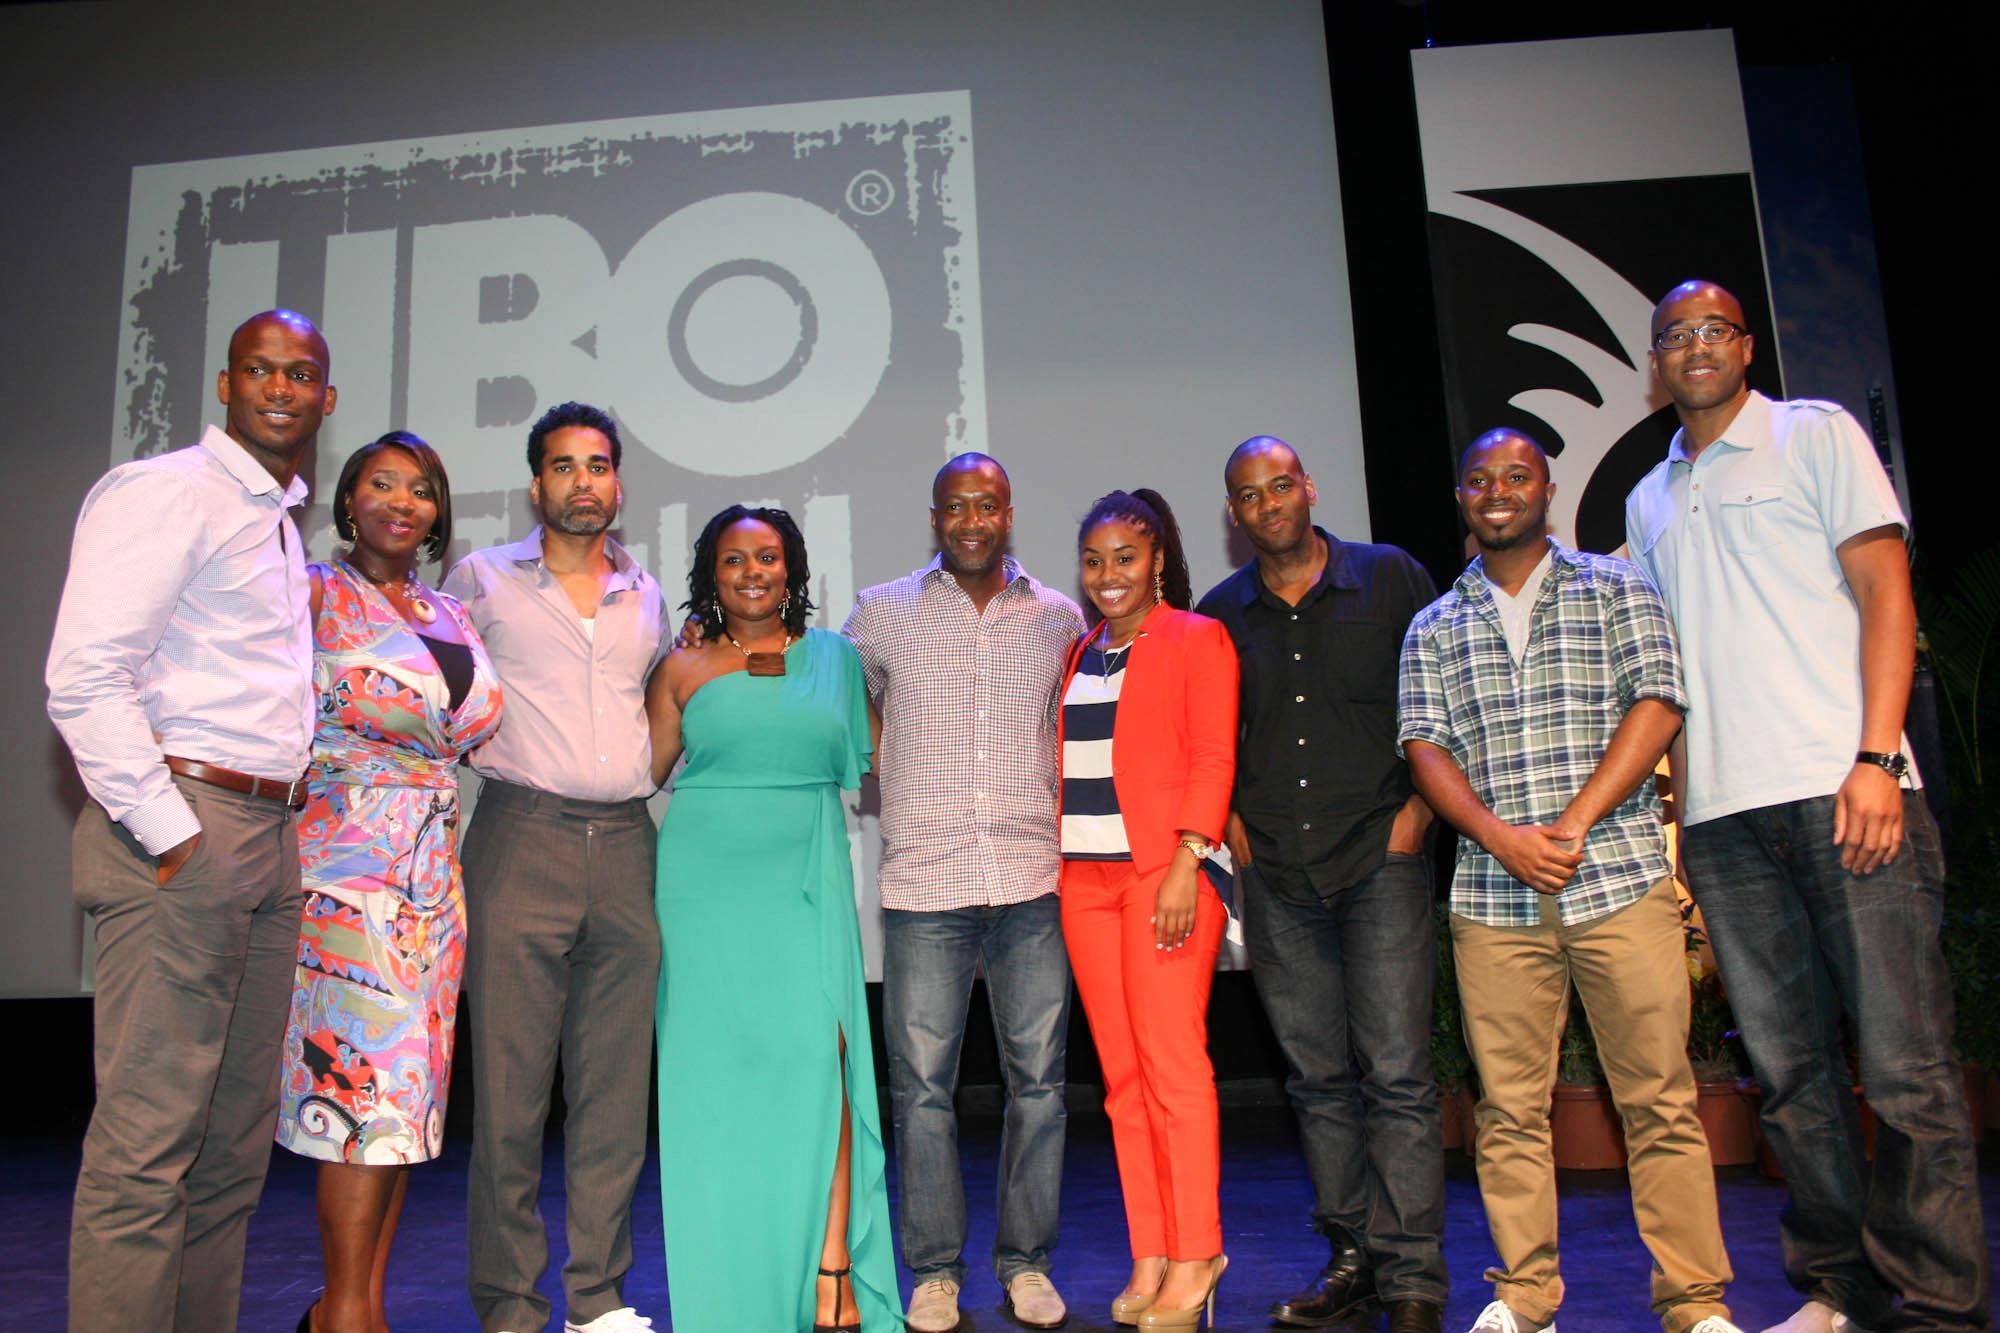 2012 ABFF/HBO shorts competition finalists